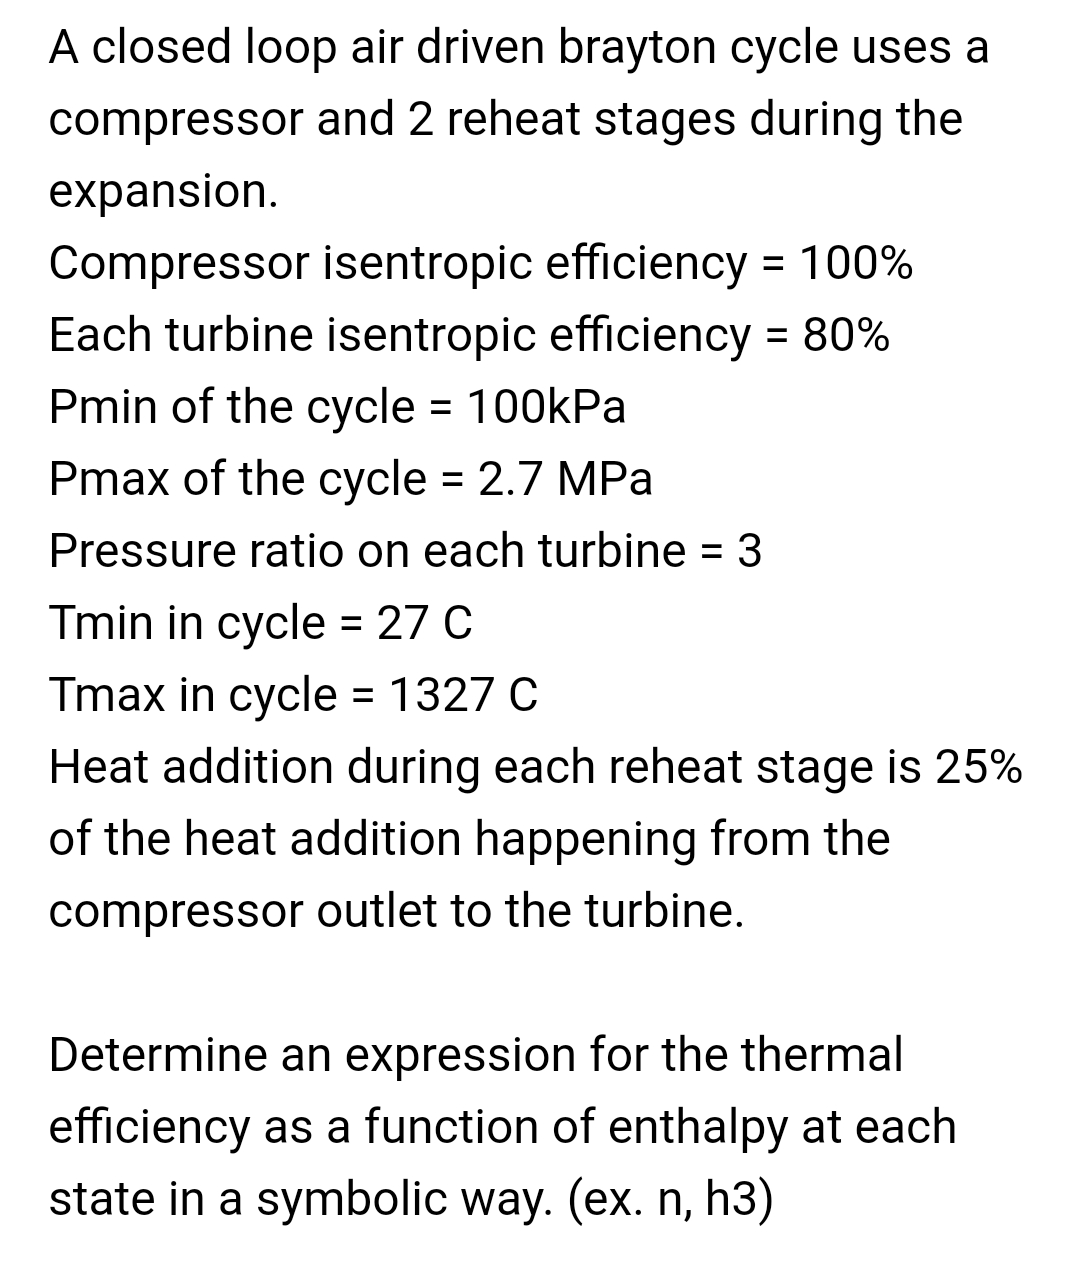 A closed loop air driven brayton cycle uses a
compressor and 2 reheat stages during the
expansion.
Compressor isentropic efficiency = 100%
Each turbine isentropic efficiency = 80%
%3D
%3D
Pmin of the cycle = 100kPa
%D
Pmax of the cycle = 2.7 MPa
Pressure ratio on each turbine = 3
Tmin in cycle = 27 C
%3D
Tmax in cycle = 1327 C
Heat addition during each reheat stage is 25%
%3D
of the heat addition happening from the
compressor outlet to the turbine.
Determine an expression for the thermal
efficiency as a function of enthalpy at each
state in a symbolic way. (ex. n, h3)
